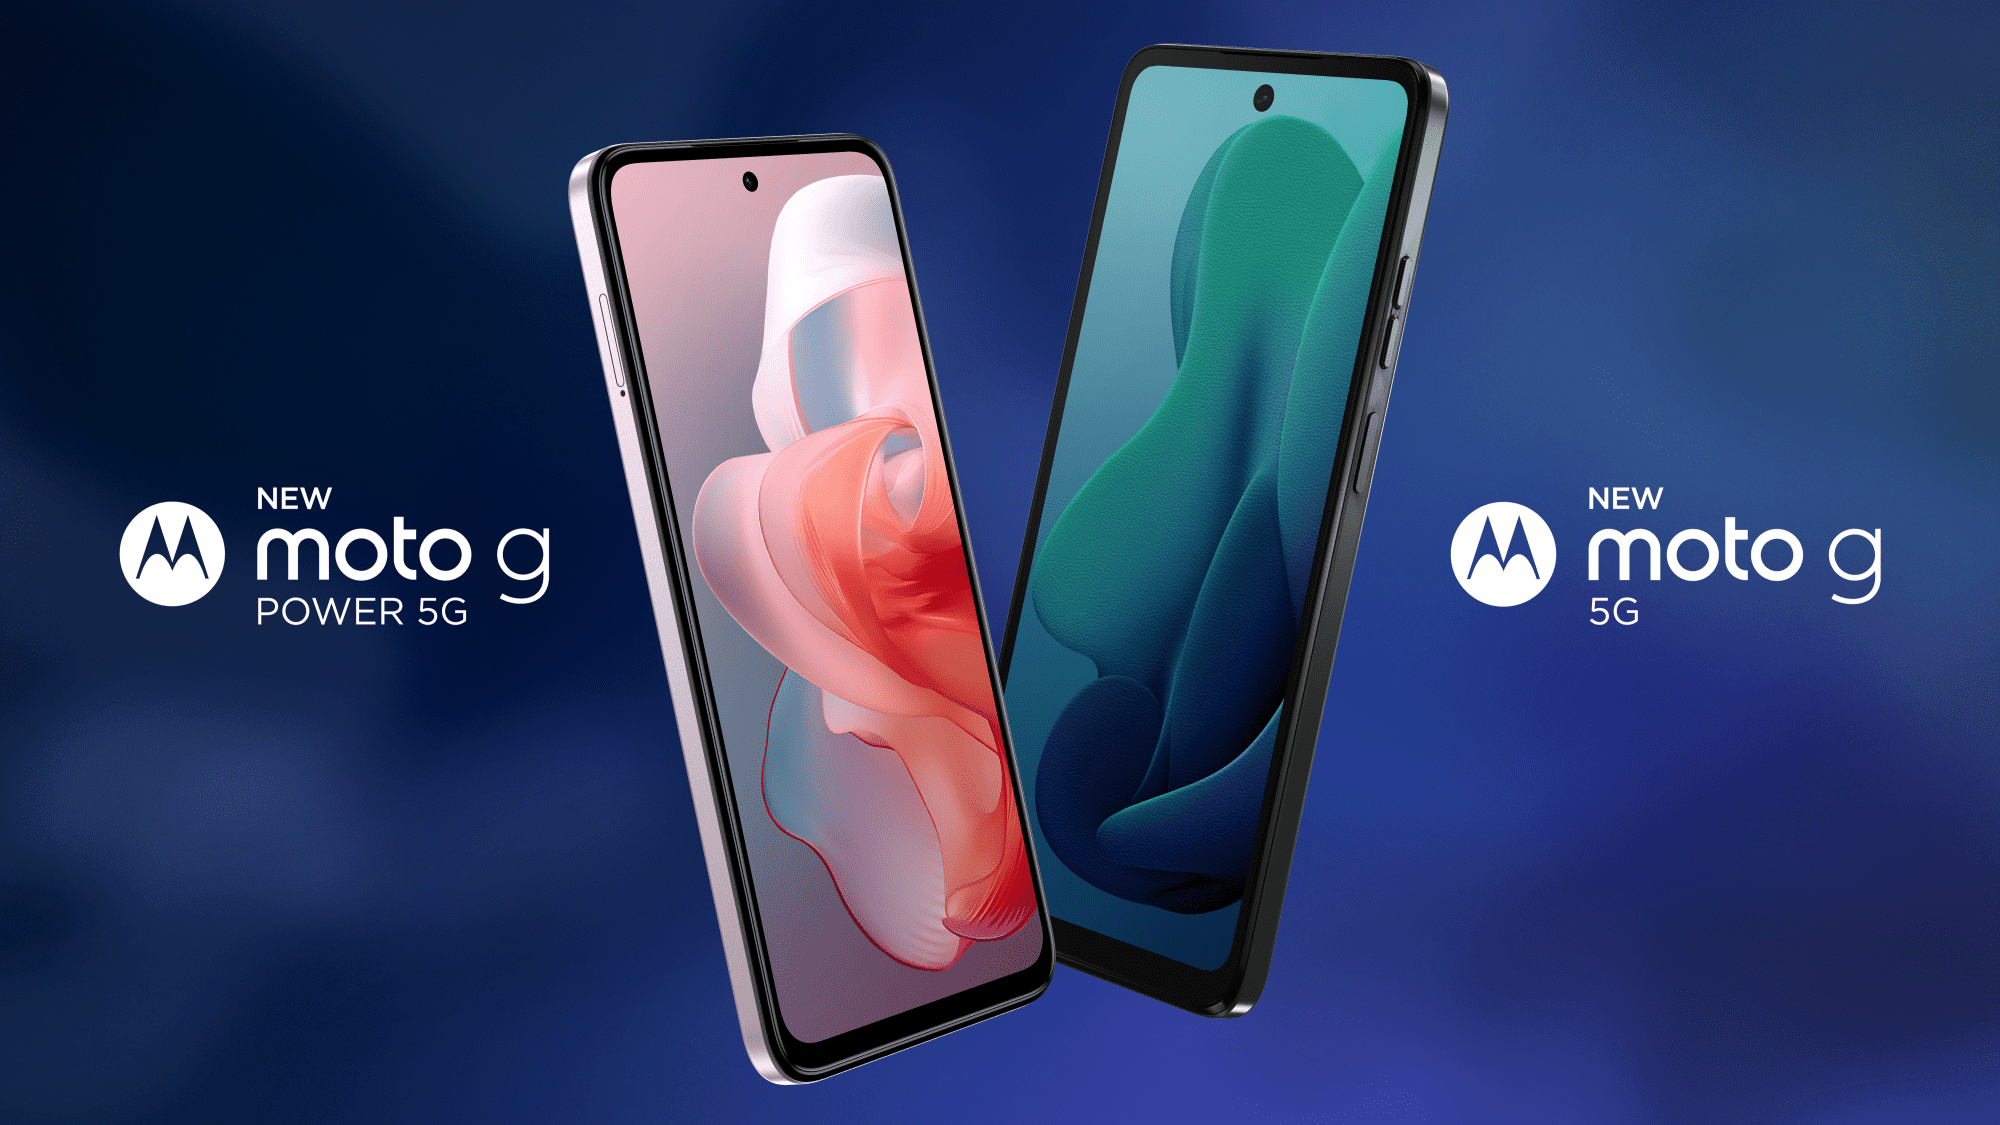 Experience next-level entertainment with the new moto g power 5G and moto g 5G